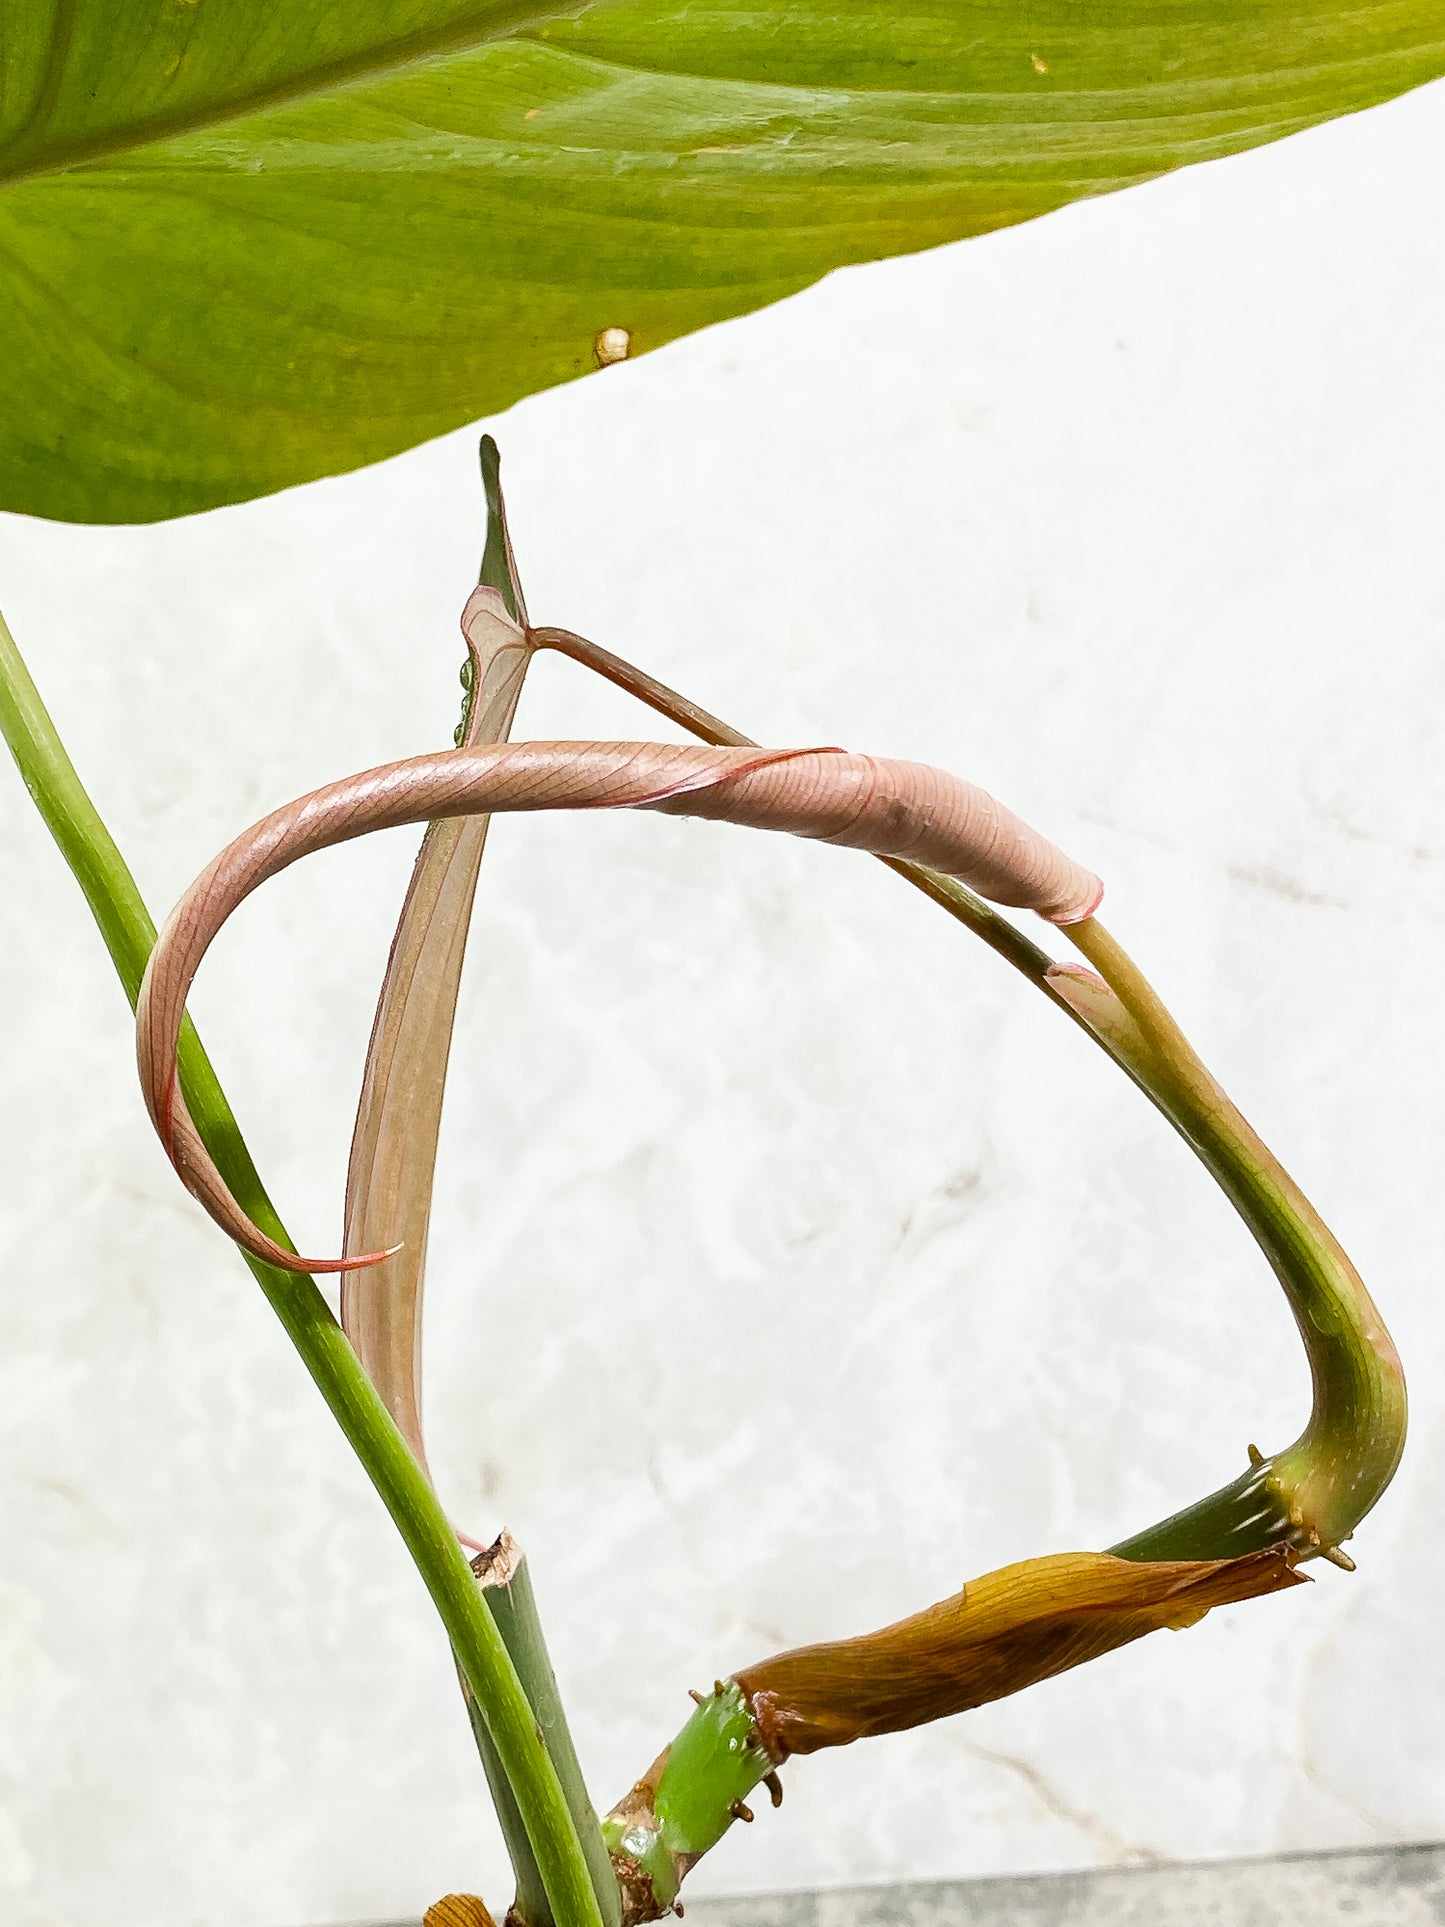 Philodendron Glorious 2 leaves 1 unfurling fully rooted